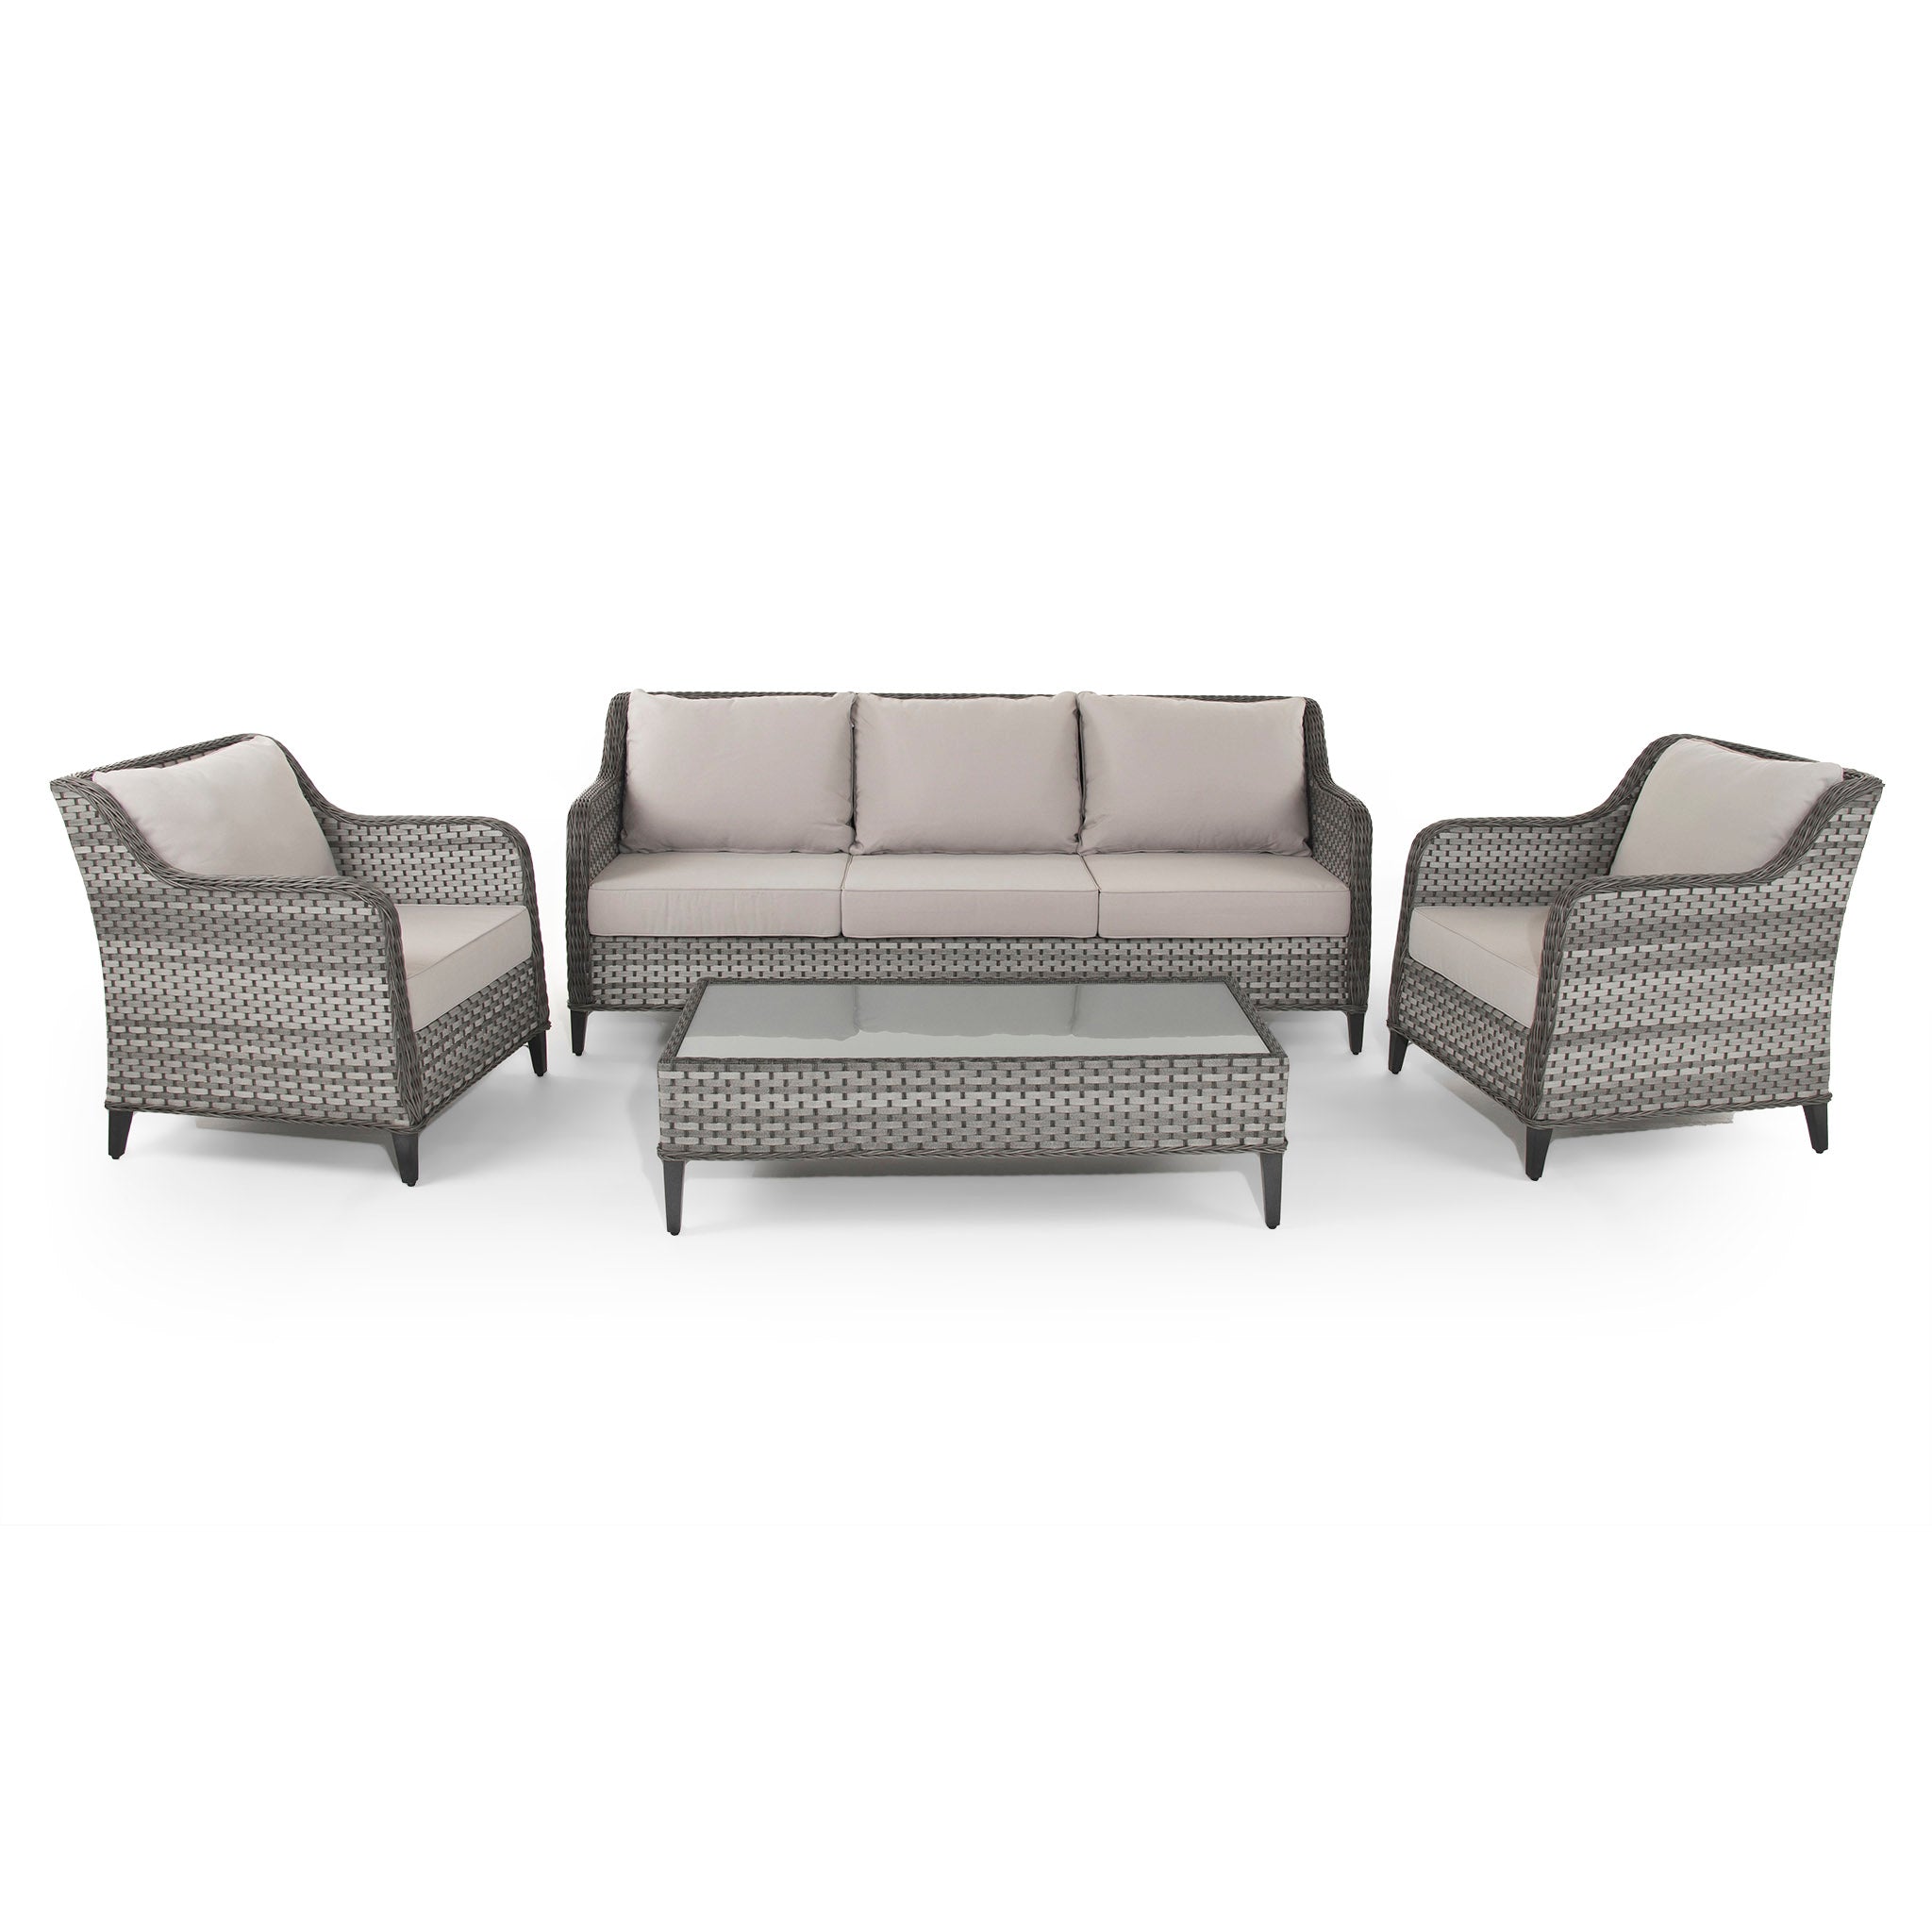 Isla | 3 Seater Sofa with 2 Armchairs and Coffee Table in Grey Rattan